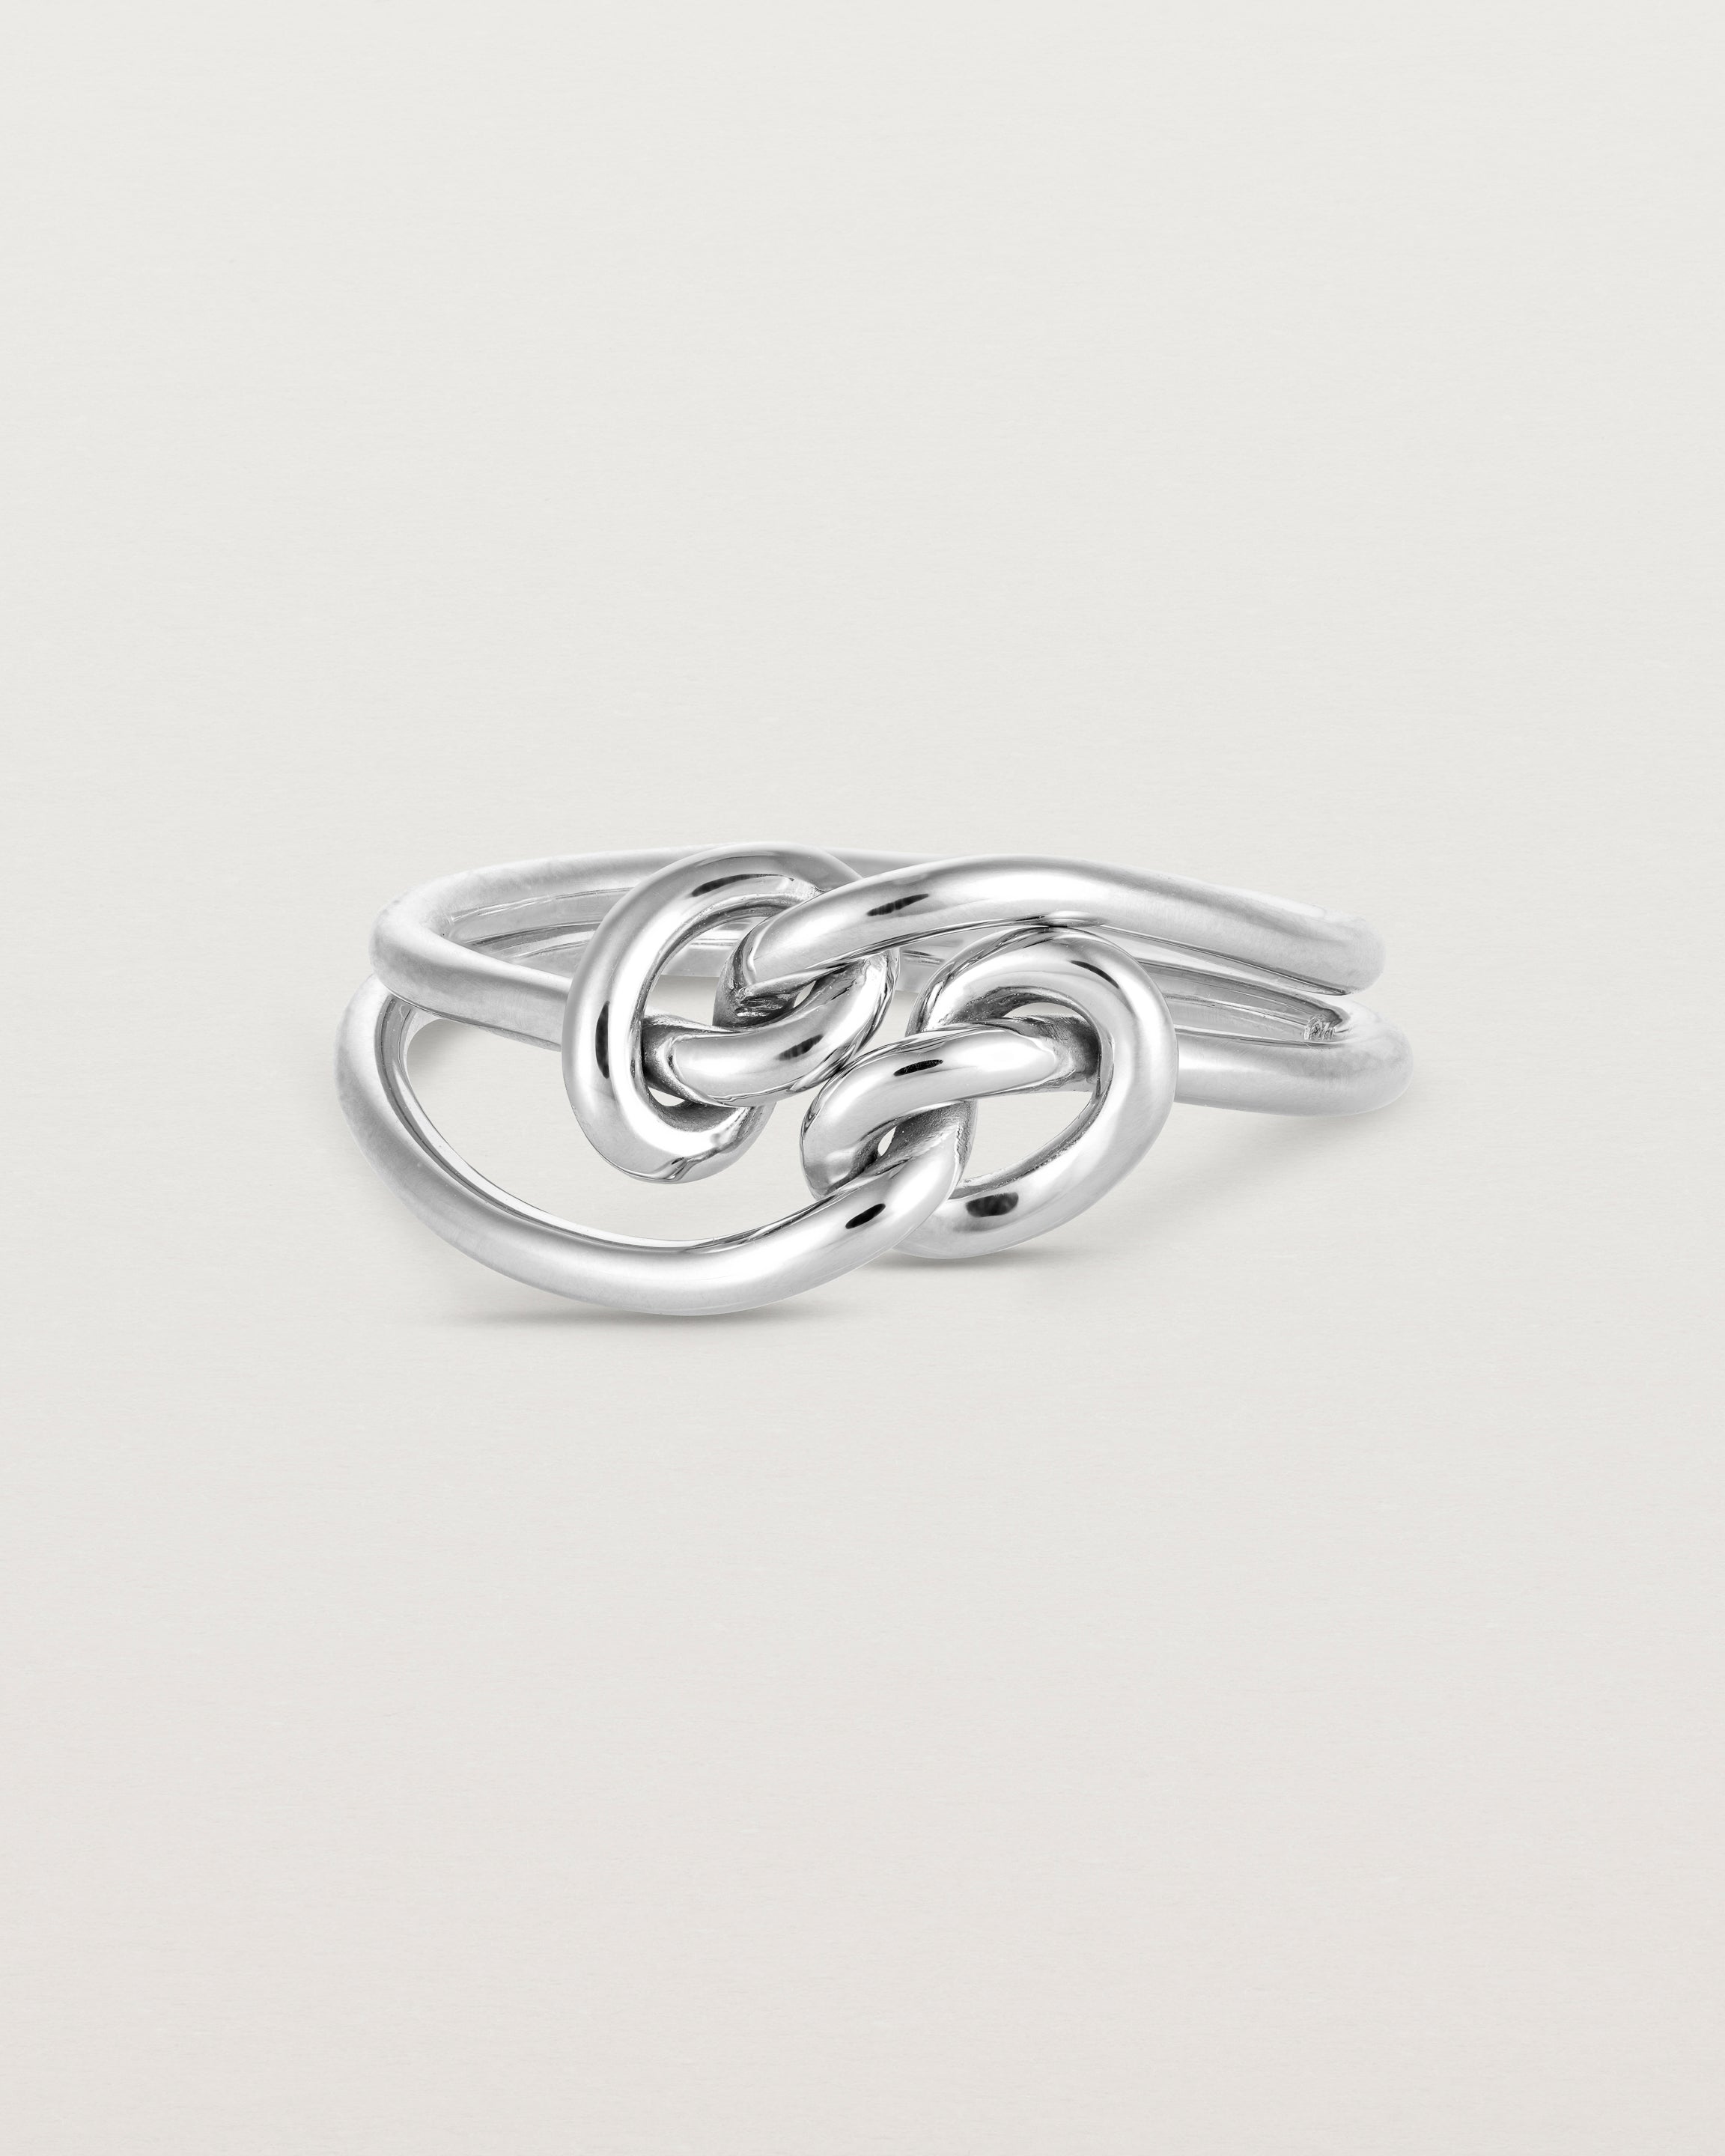 _label: Two Cara Ring's stacked together